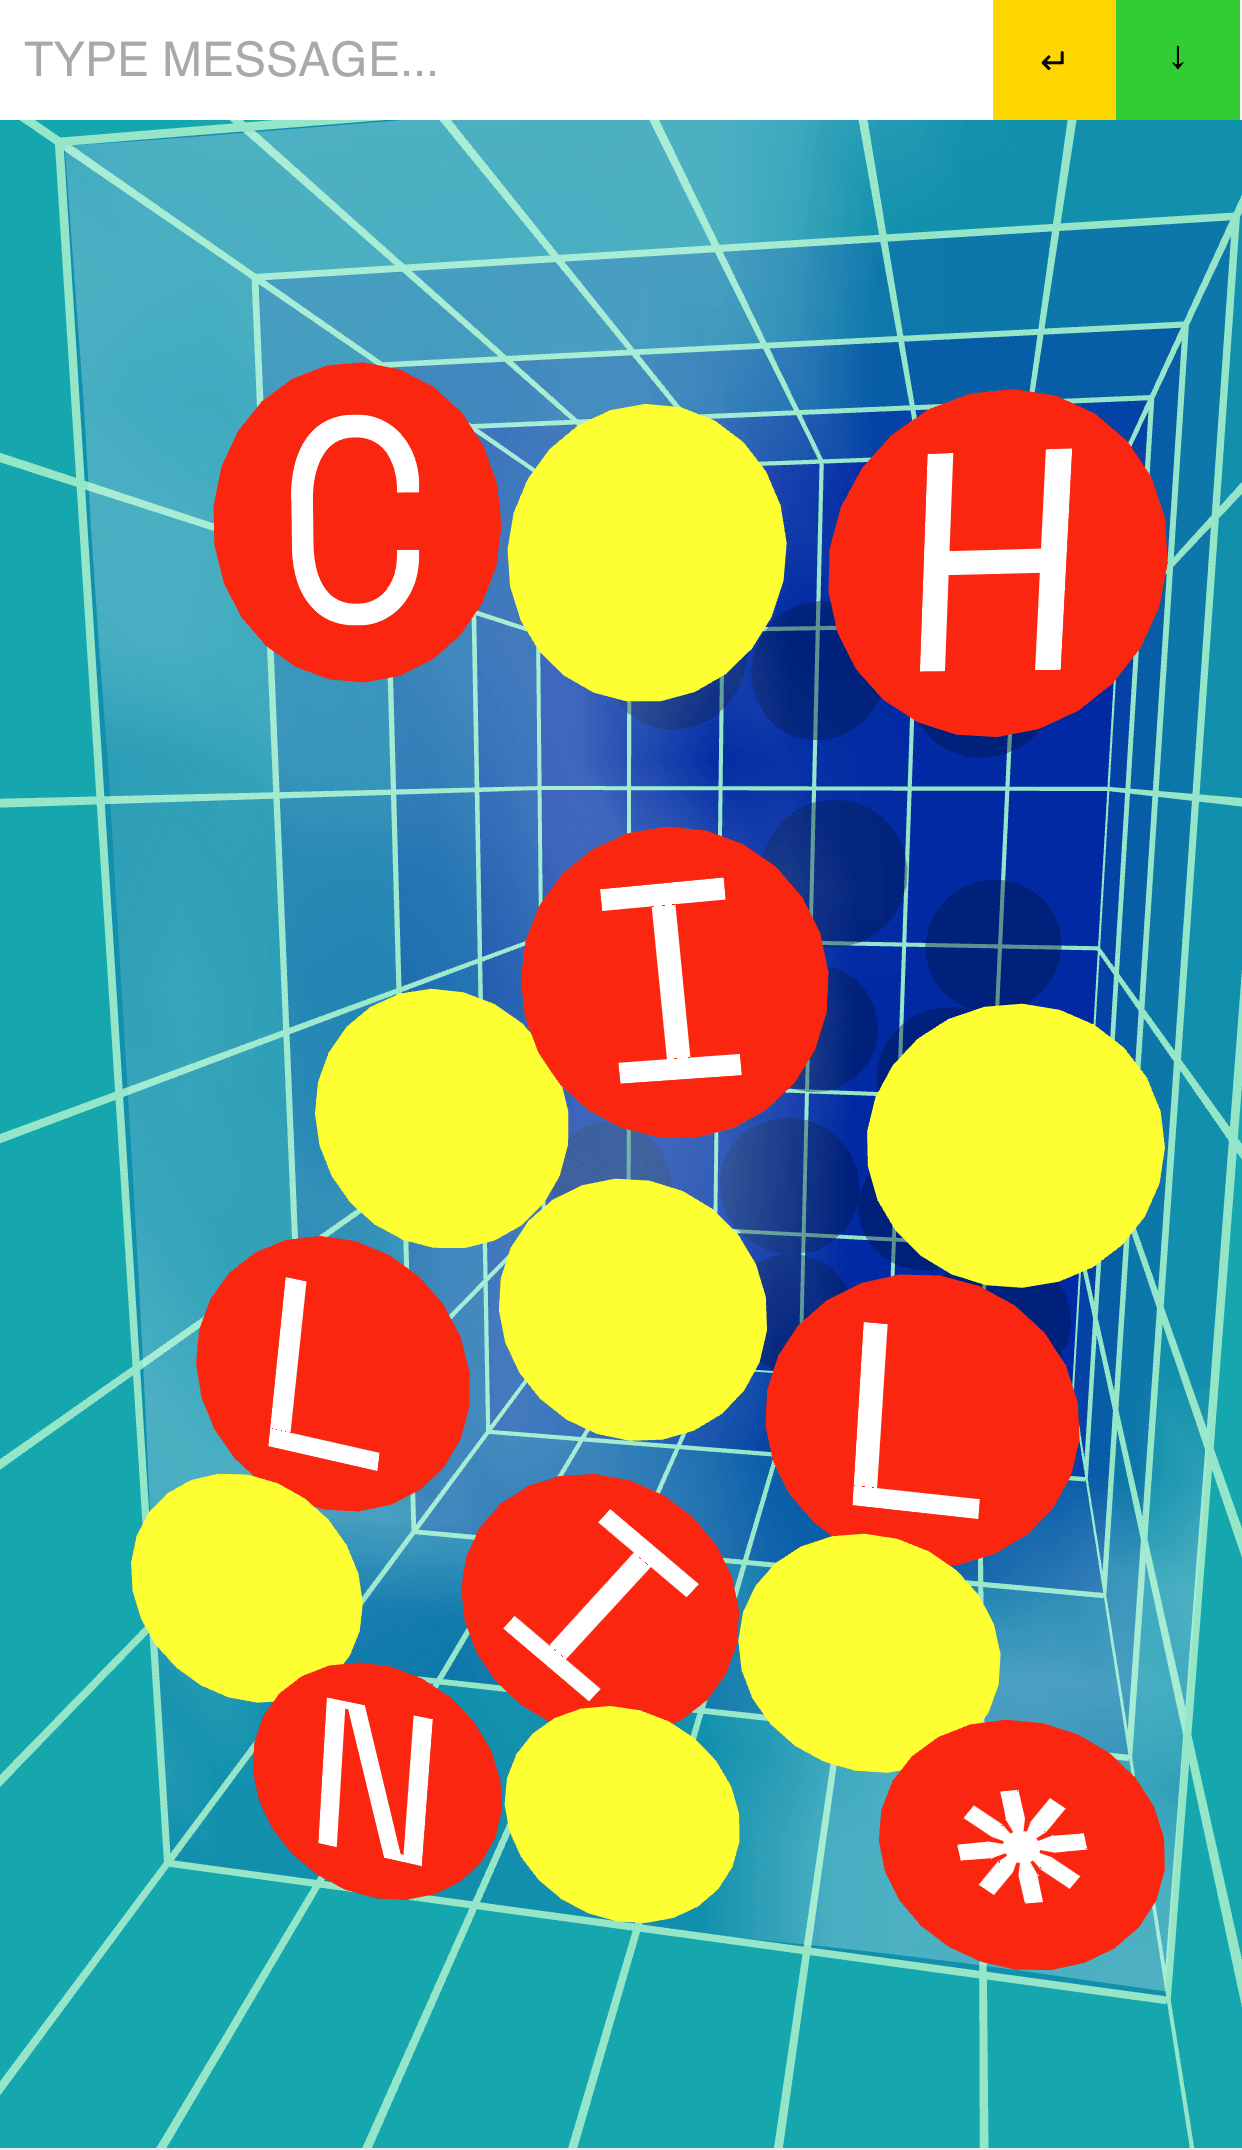 A screenshot of a poster with red and yellow circles of letters from the word chillin against a blue tile background that changes perspective on a mobile device.
        At the top, there is a text input box to enter a message and download your own poster.